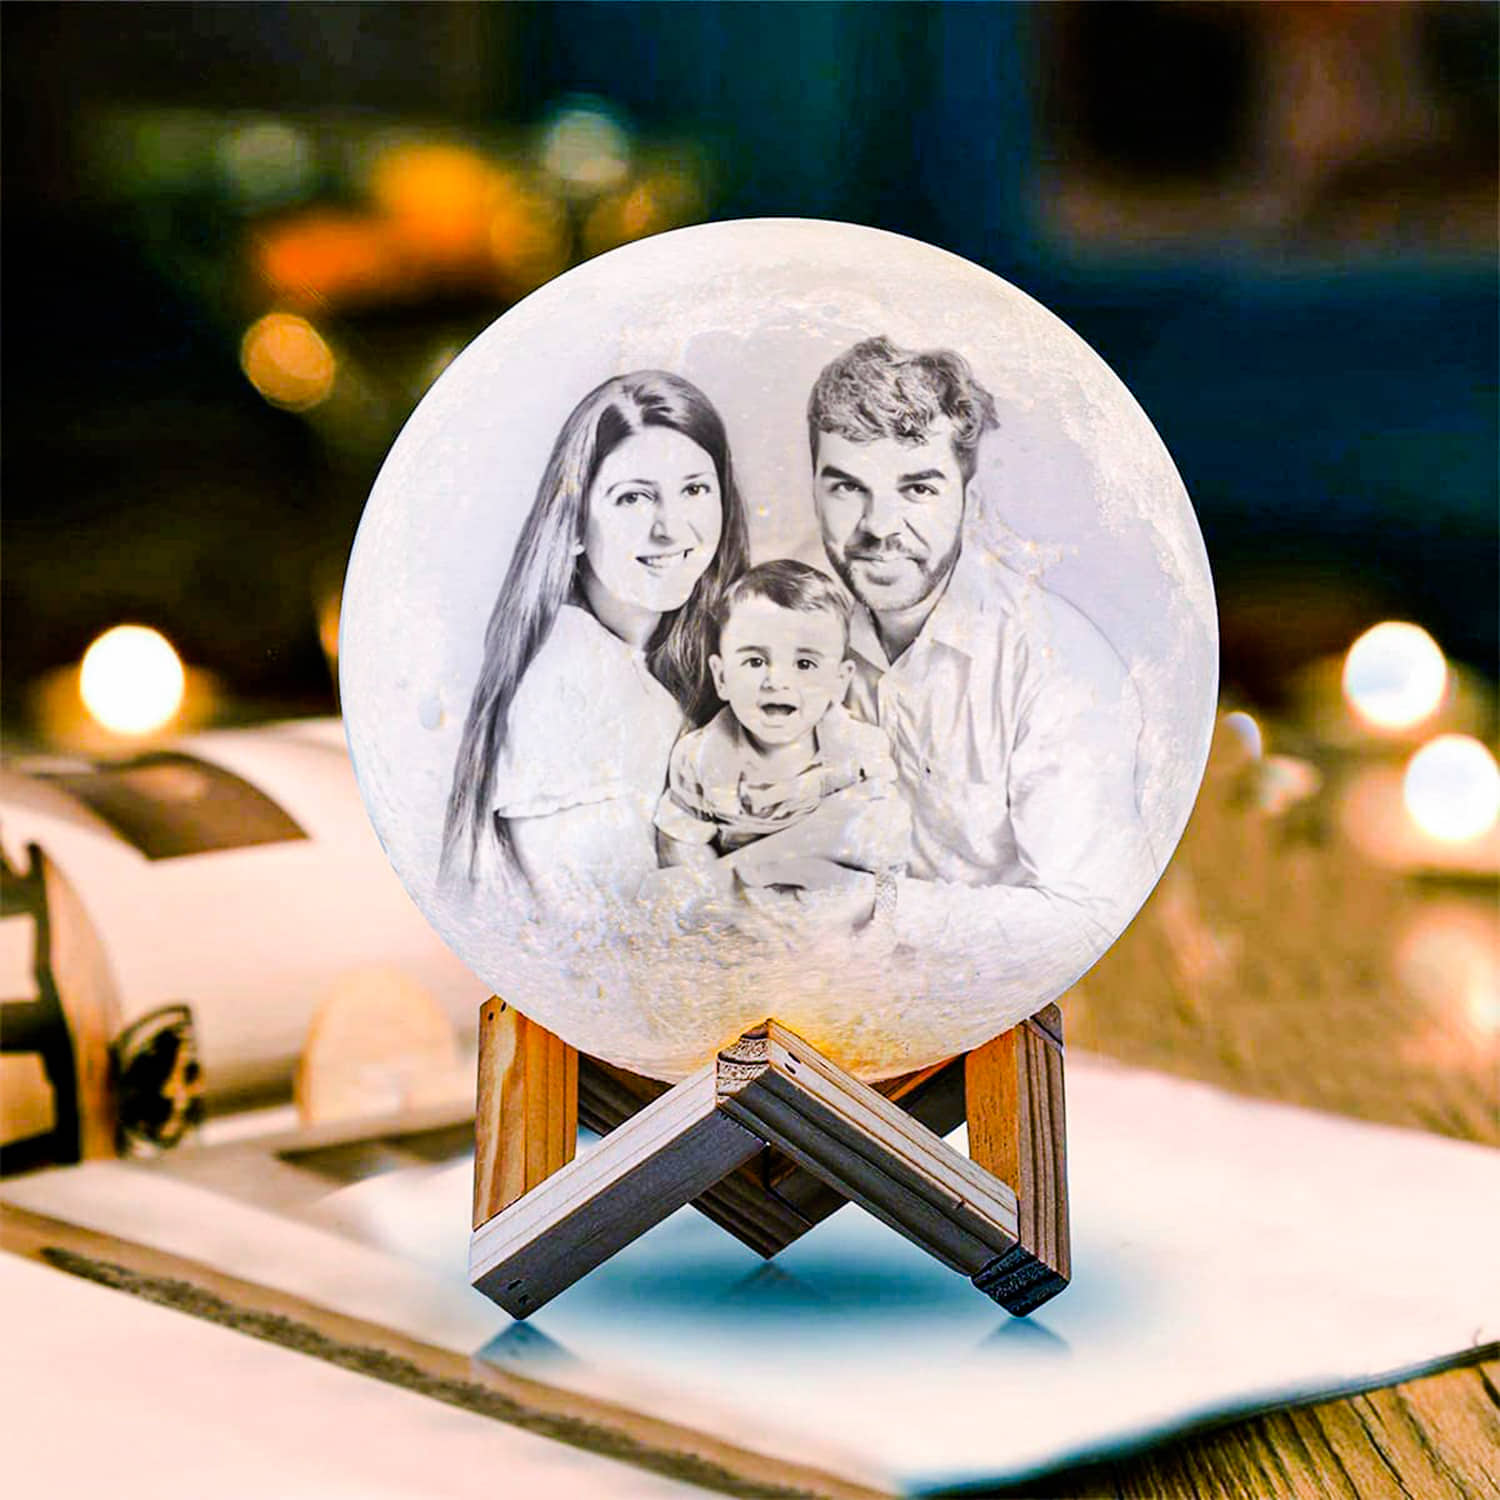 Online Personalized Wedding Gifts: Unique Marriage Gift Ideas